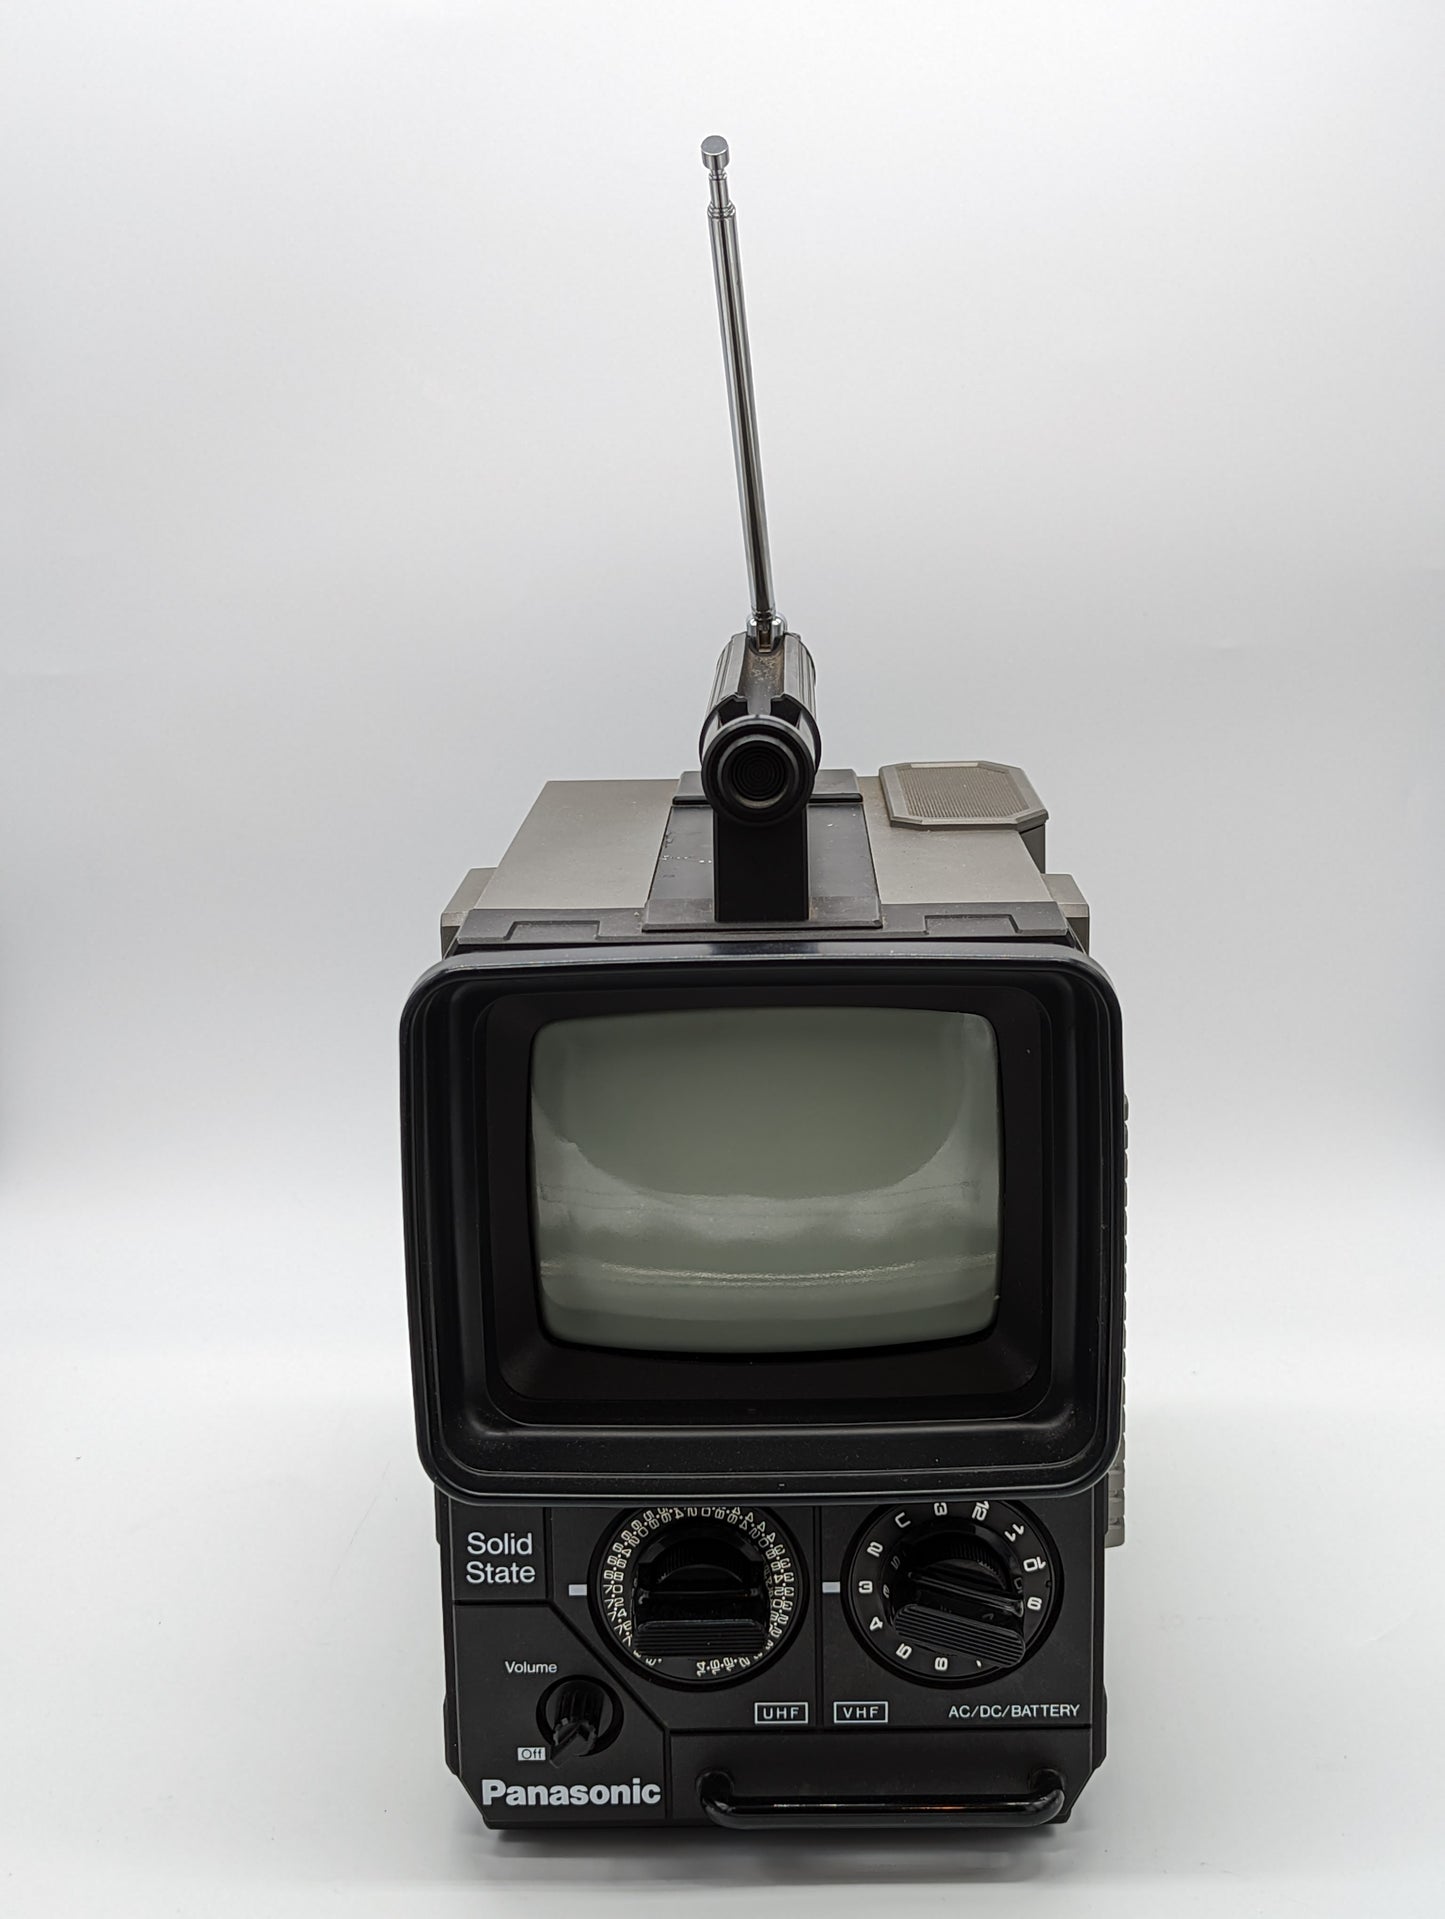 Portable Televisions (1977-2001)